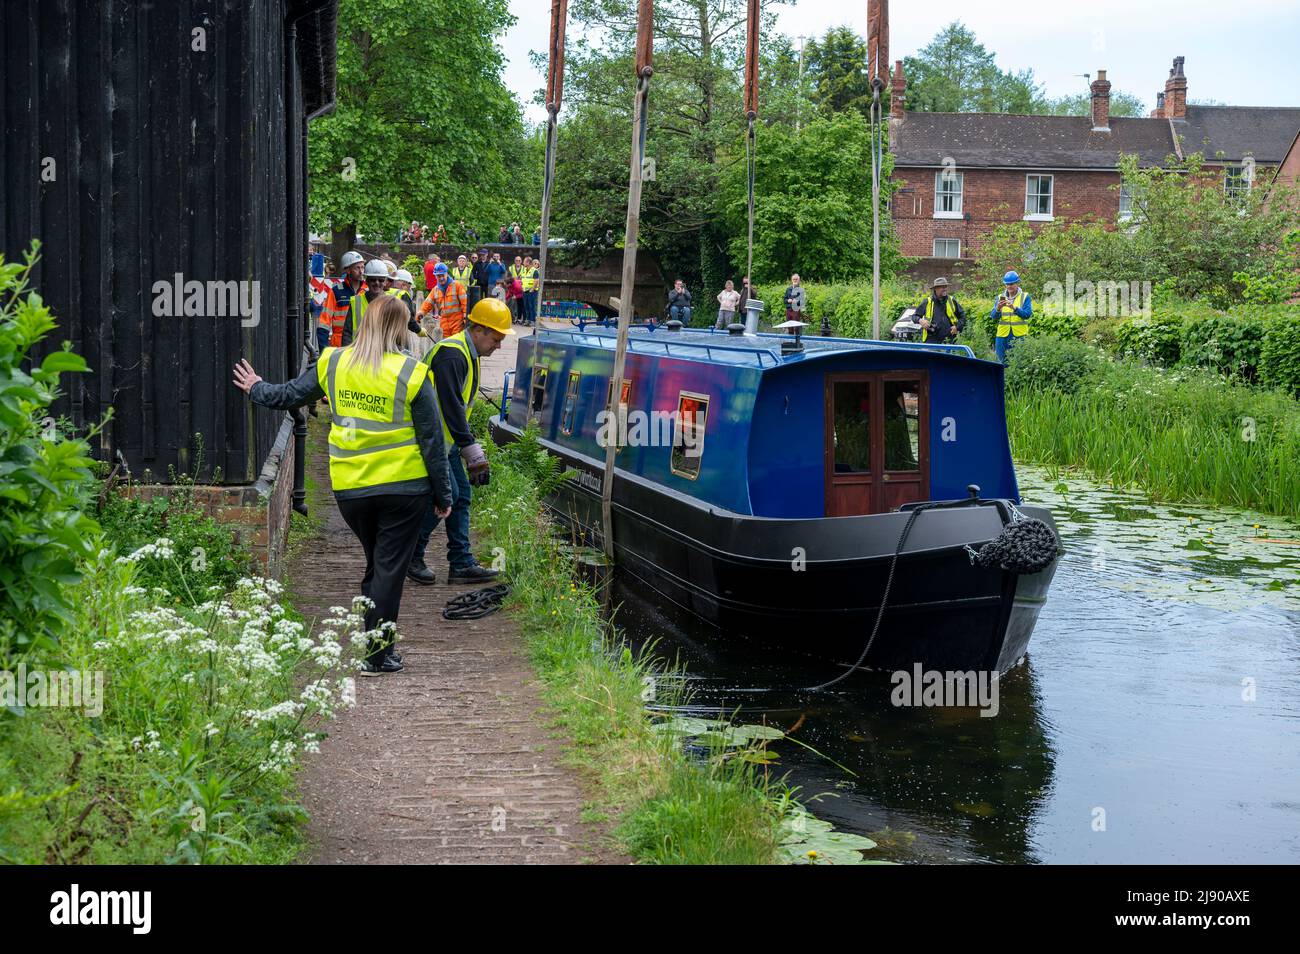 After almost 80 years boats are finally back on the Shrewsbury & Newport Canal with the launch of a narrowboat at the canal basin in the Shropshire town of Newport. Stock Photo